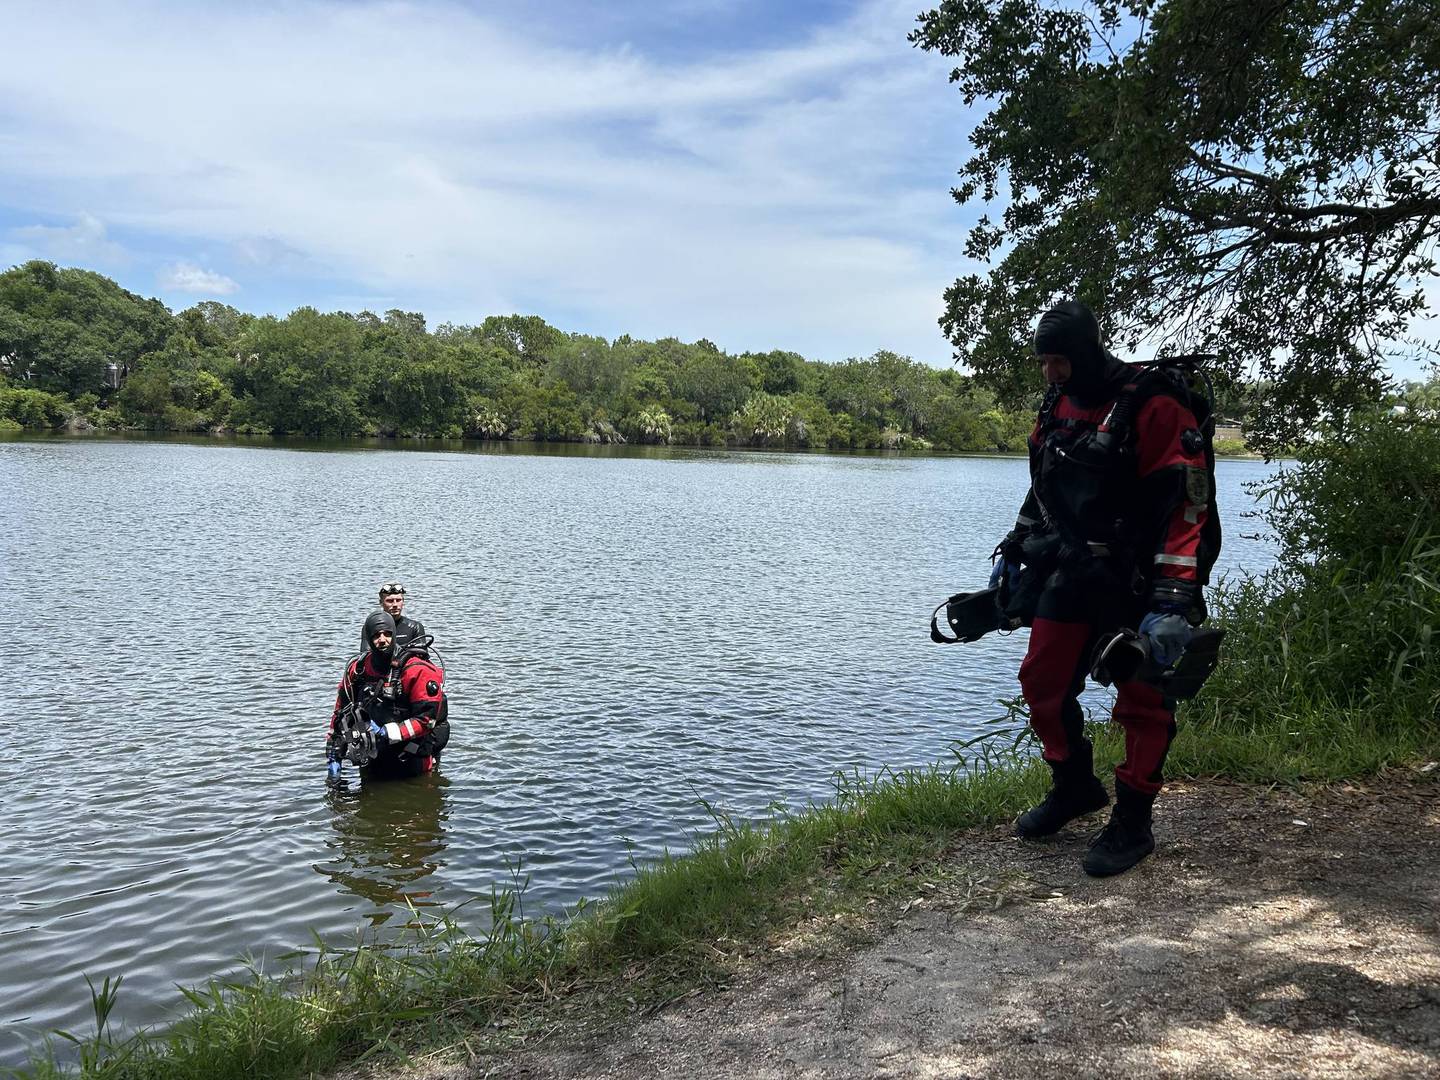 This week, the SJSO dive team trained in evidence and body recovery scenarios at Lighthouse Boat Ramp.